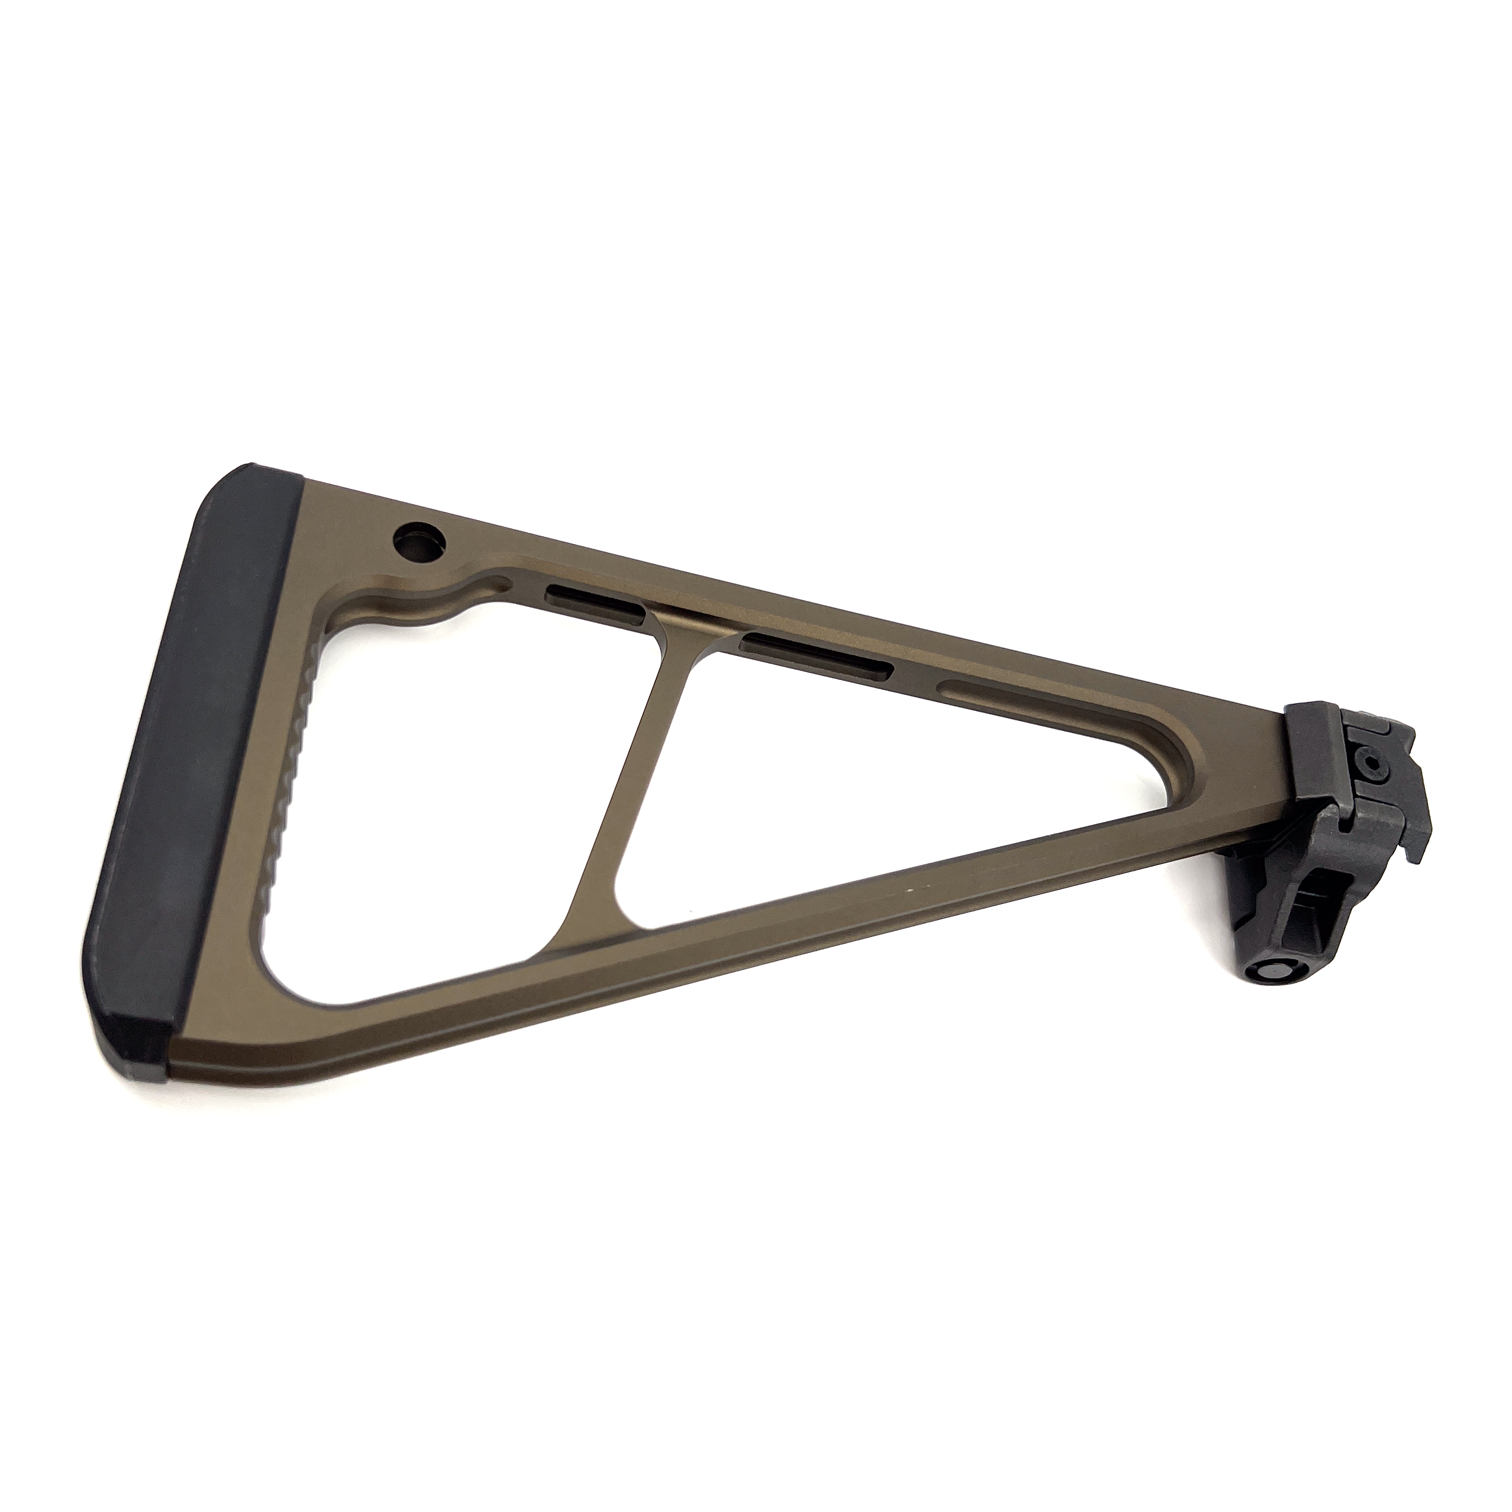 AIRSOFT ARTISAN TRIANGLE FOLDING STOCK FOR M1913 ( BLACK / DDC )